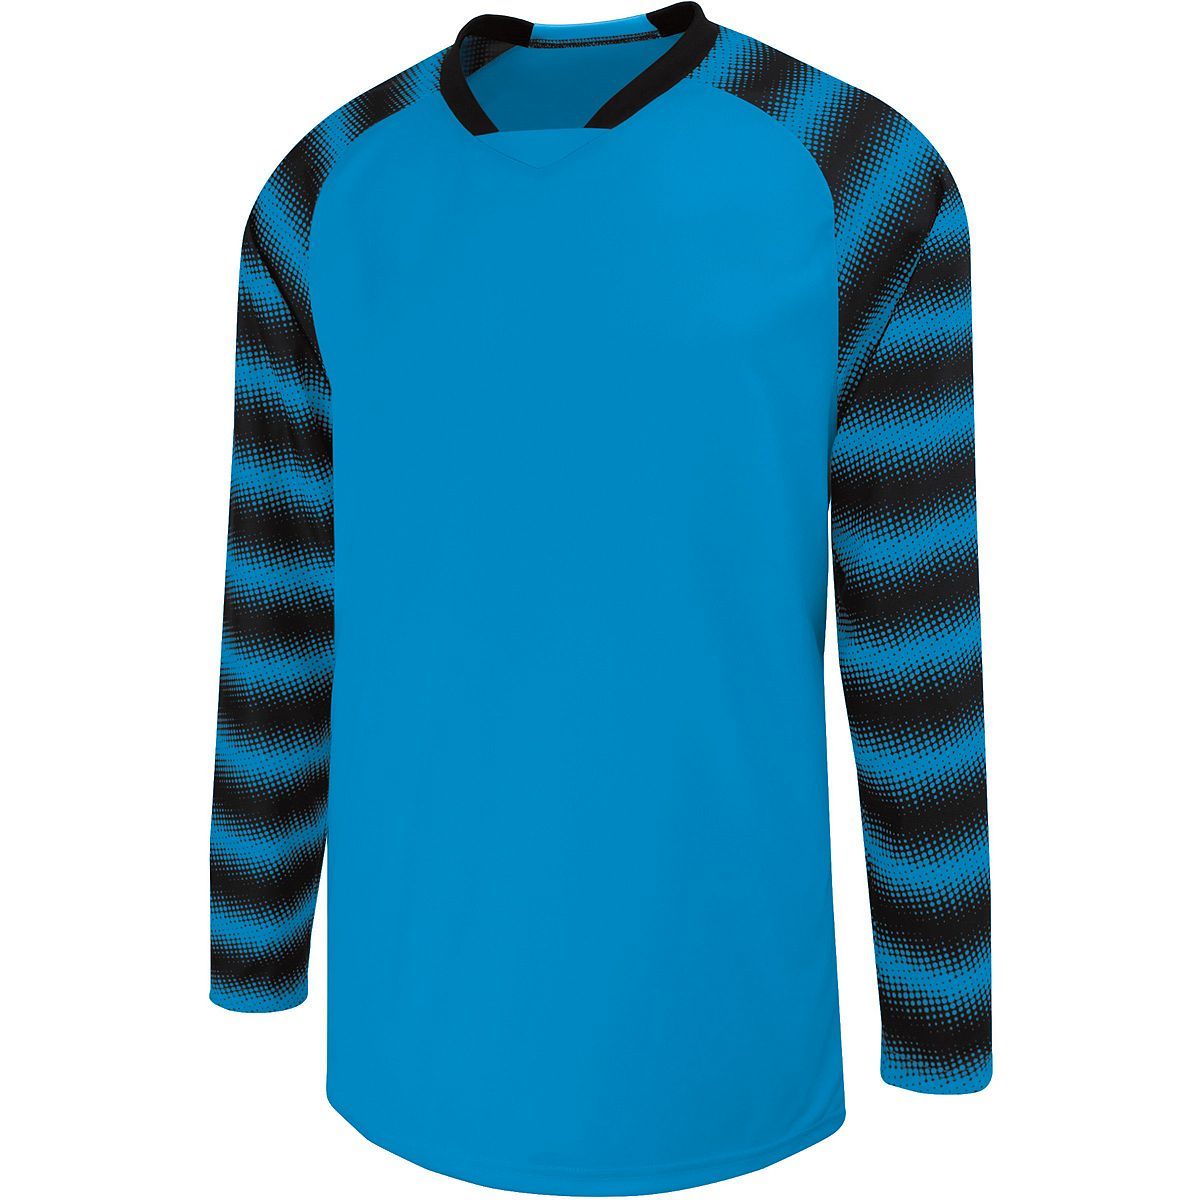 High 5 Youth Prism Goalkeeper Jersey in Power Blue/Black  -Part of the Youth, Youth-Jersey, High5-Products, Soccer, Shirts, All-Sports-1 product lines at KanaleyCreations.com